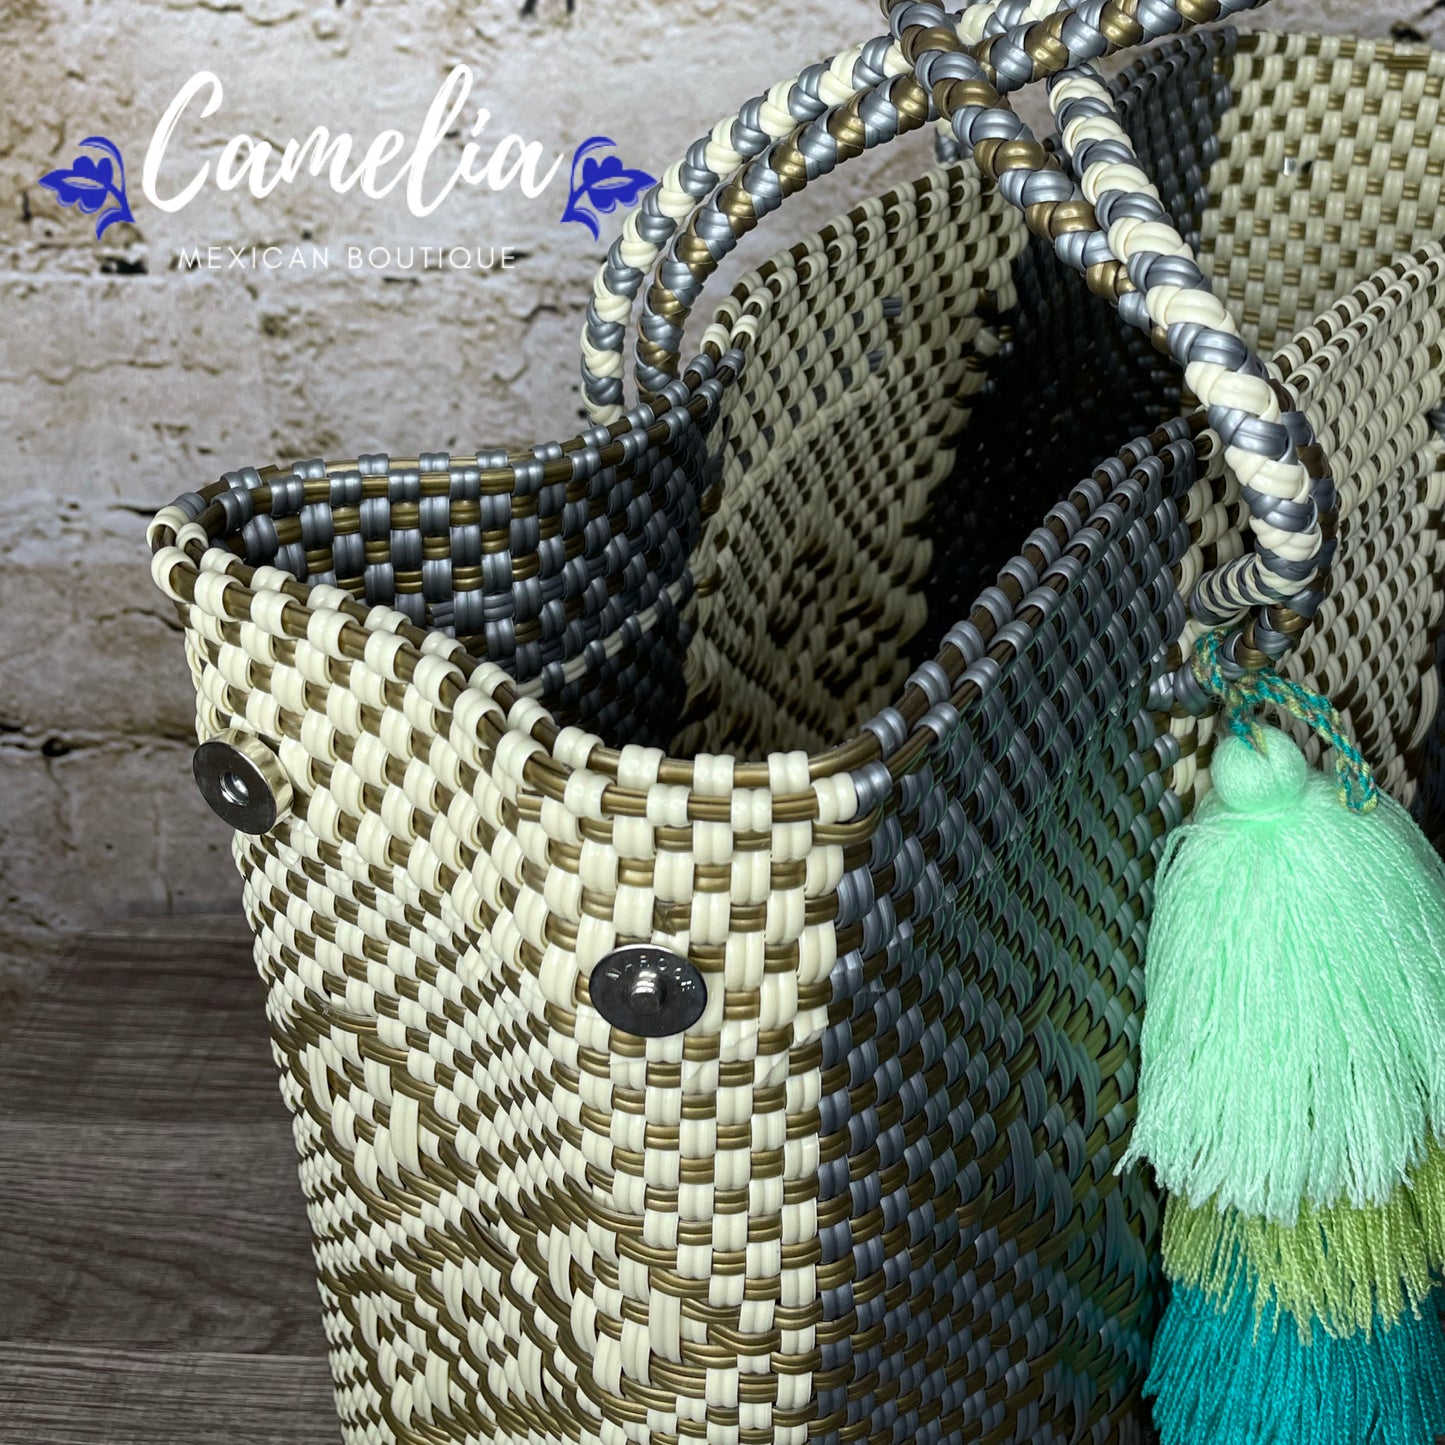 Handwoven Oaxacan Upcycled Tote - Double Strap Adjustable Opening